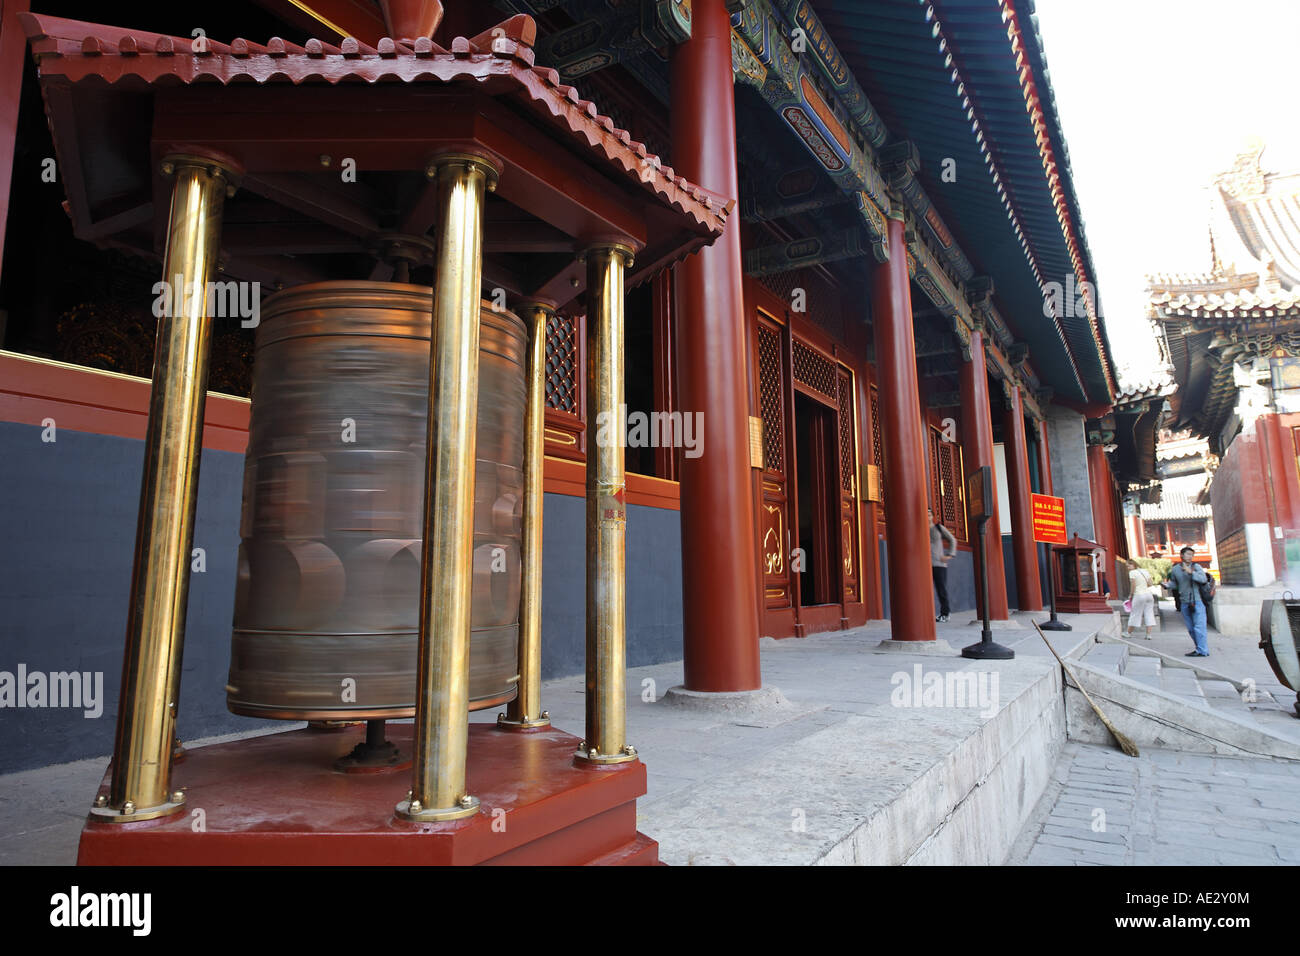 Prayer wheel outside a temple in the Yonghe Lamasery Beijing China Asia Stock Photo